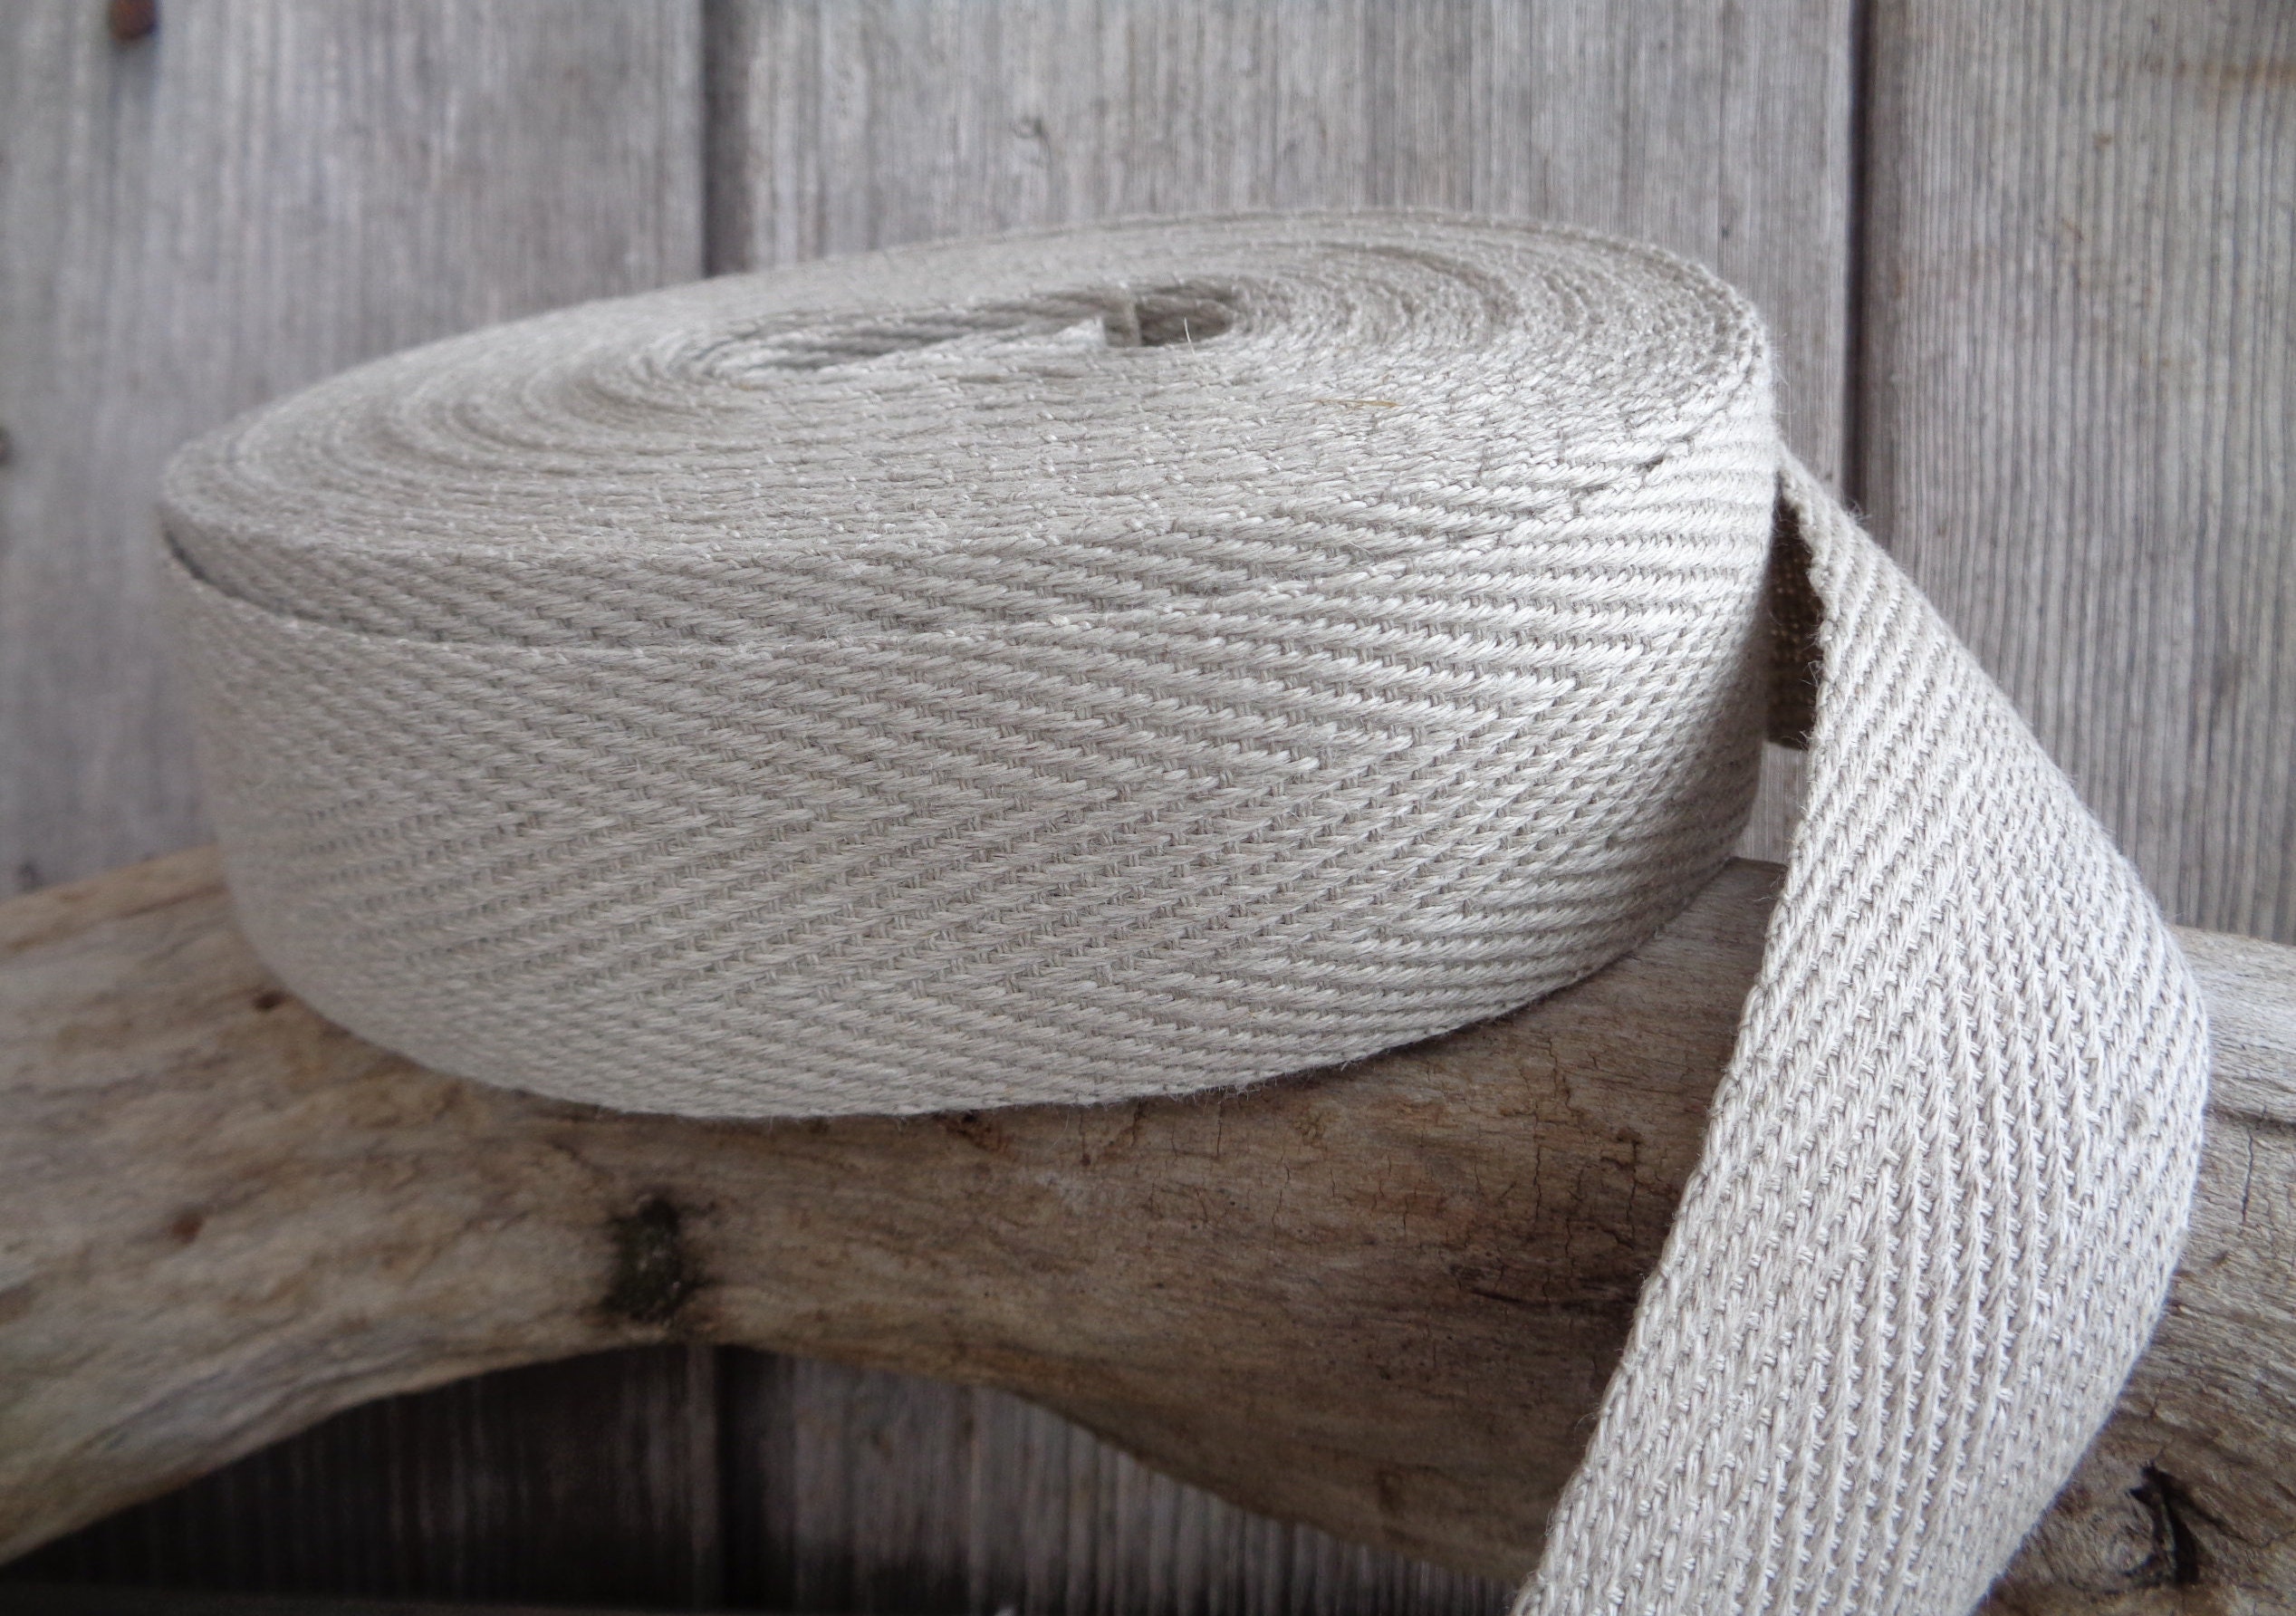 Linen Ribbon, Natural Flax, 5 widths, by the Yard